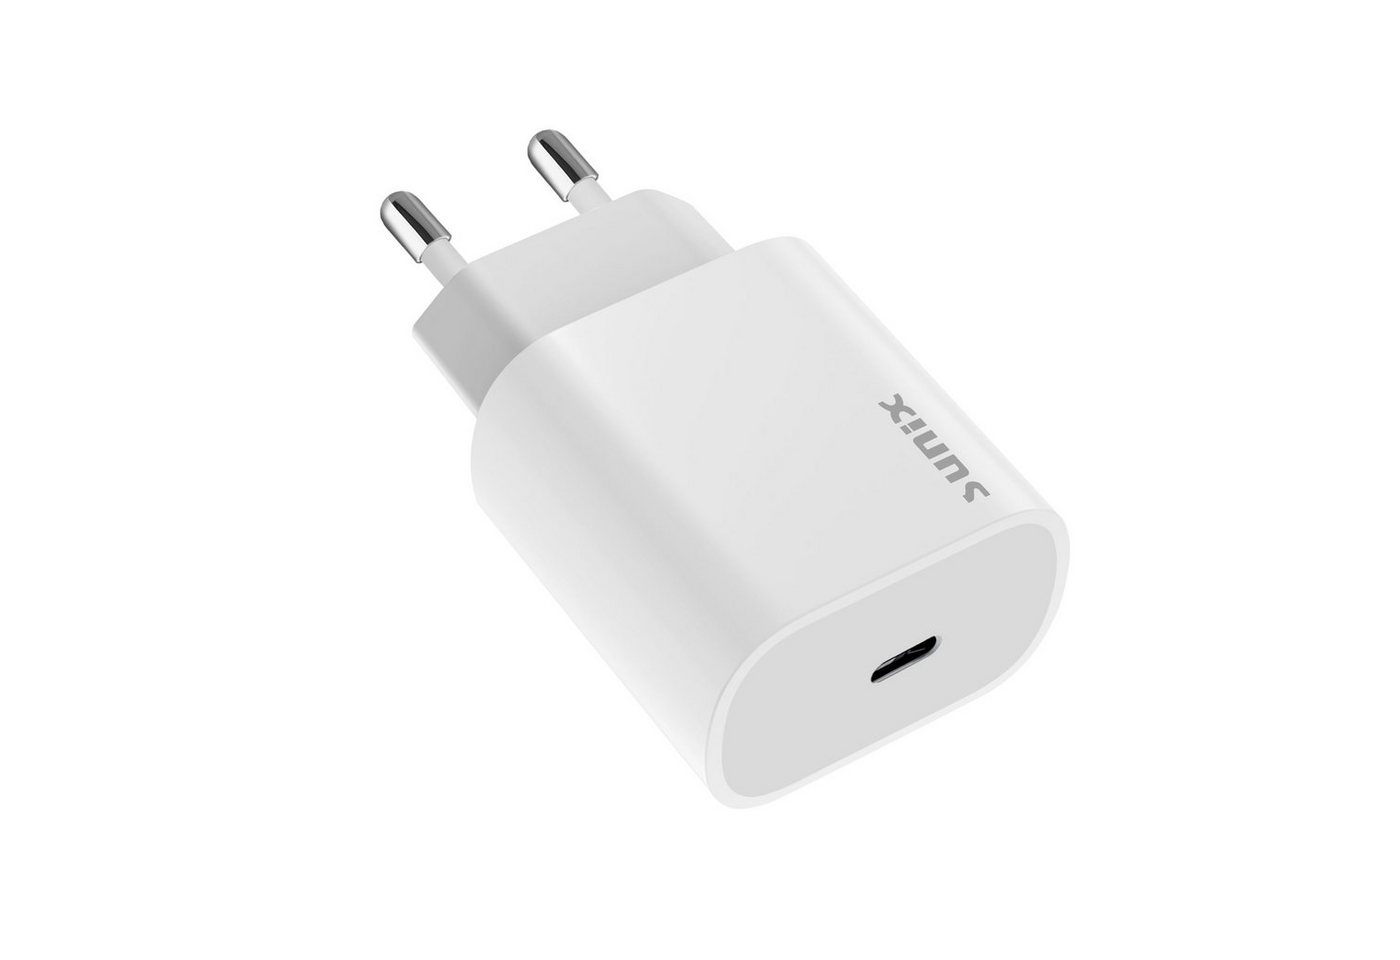 COFI 1453 PD 18W Fast Charger Ladegerät USB Schnell-Ladegerät Typ-C (USB-C) Smartphone-Ladegerät von COFI 1453